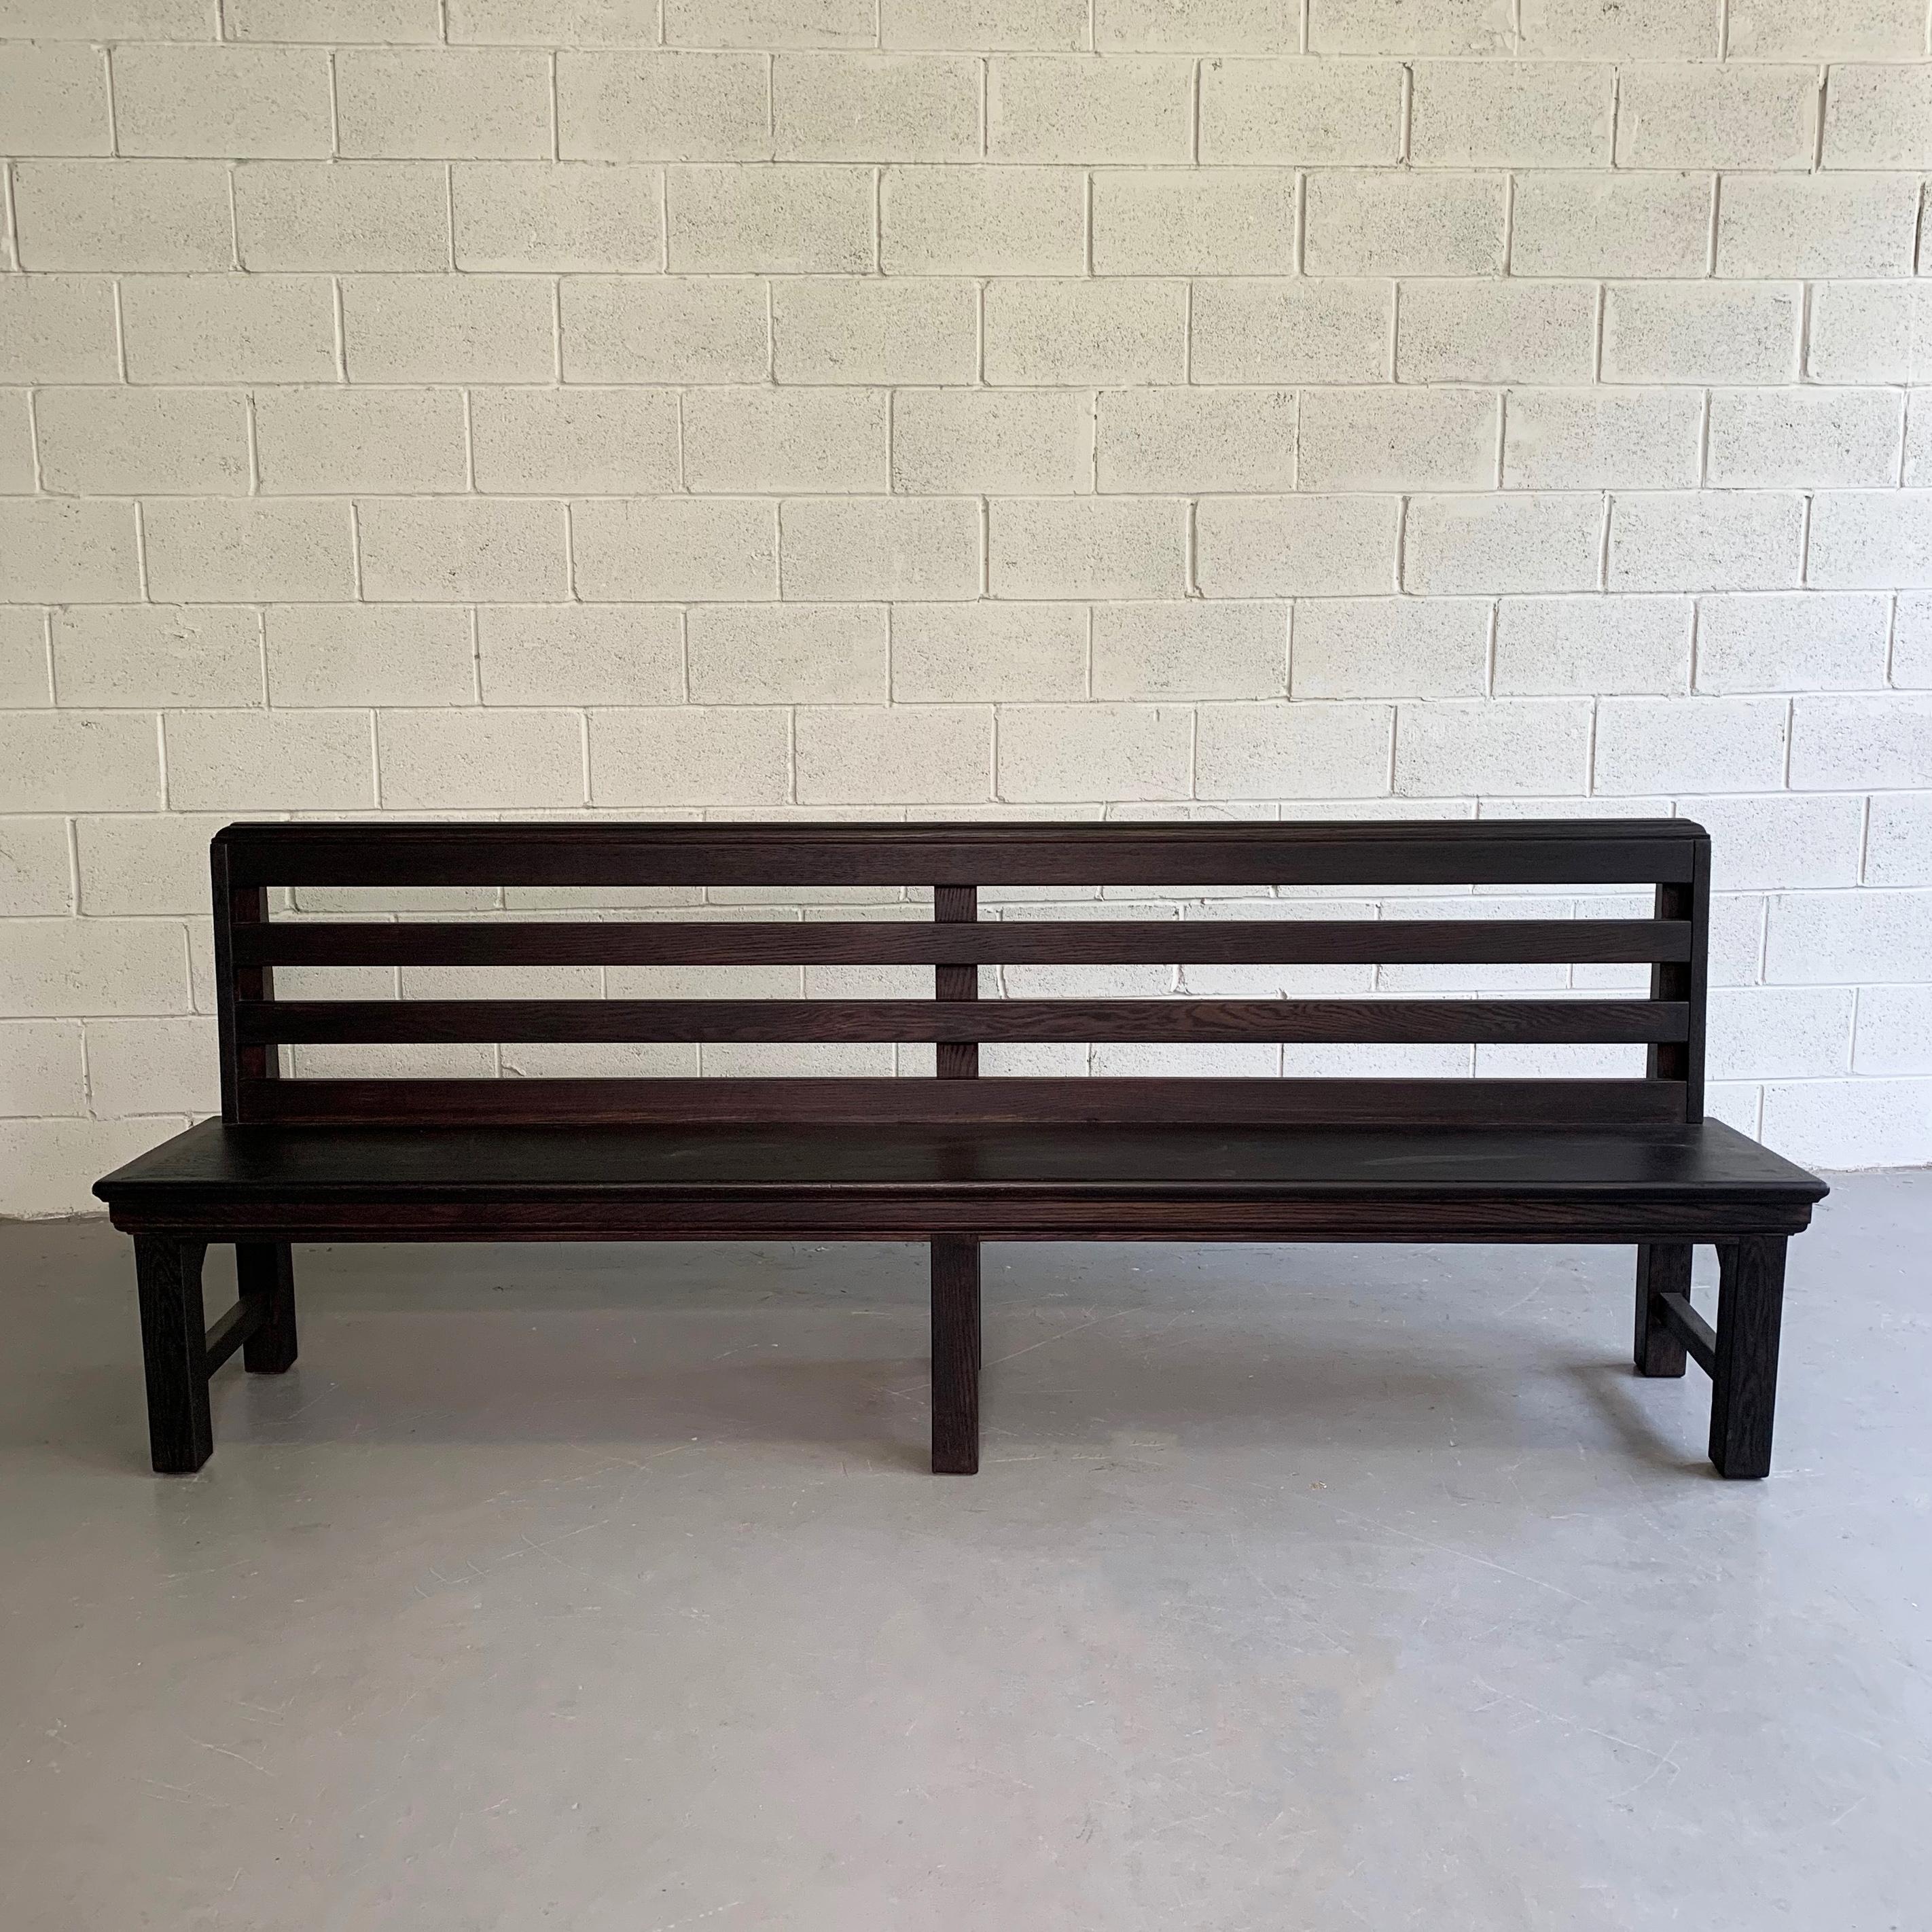 Industrial, 1940s, oak, train station bench features an ebonized finish and wonderful details all around. 